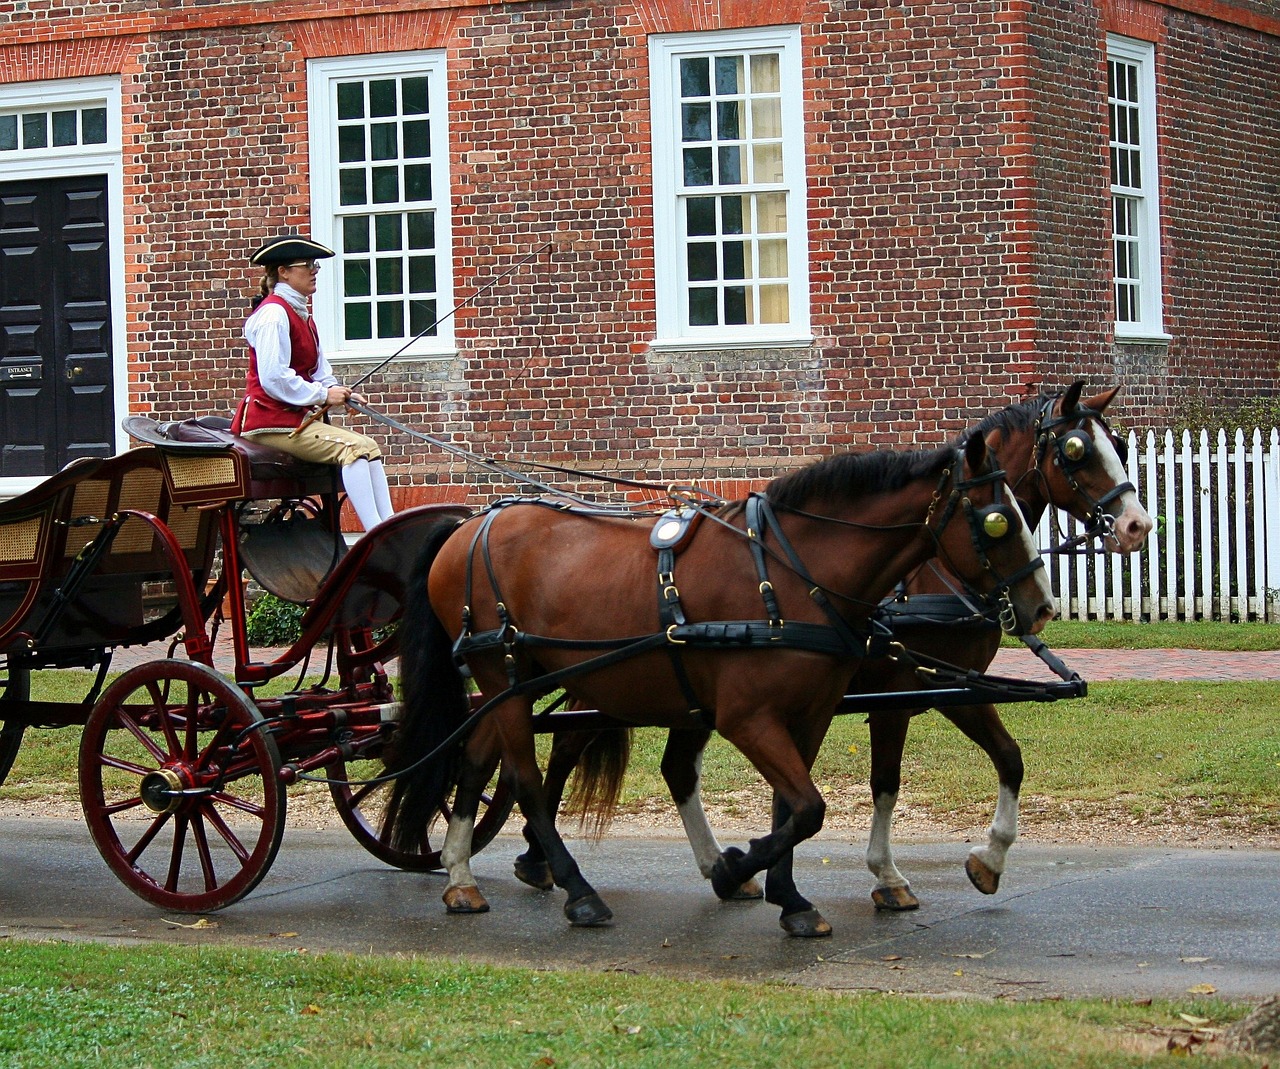 7 Days of History and Fun in Williamsburg